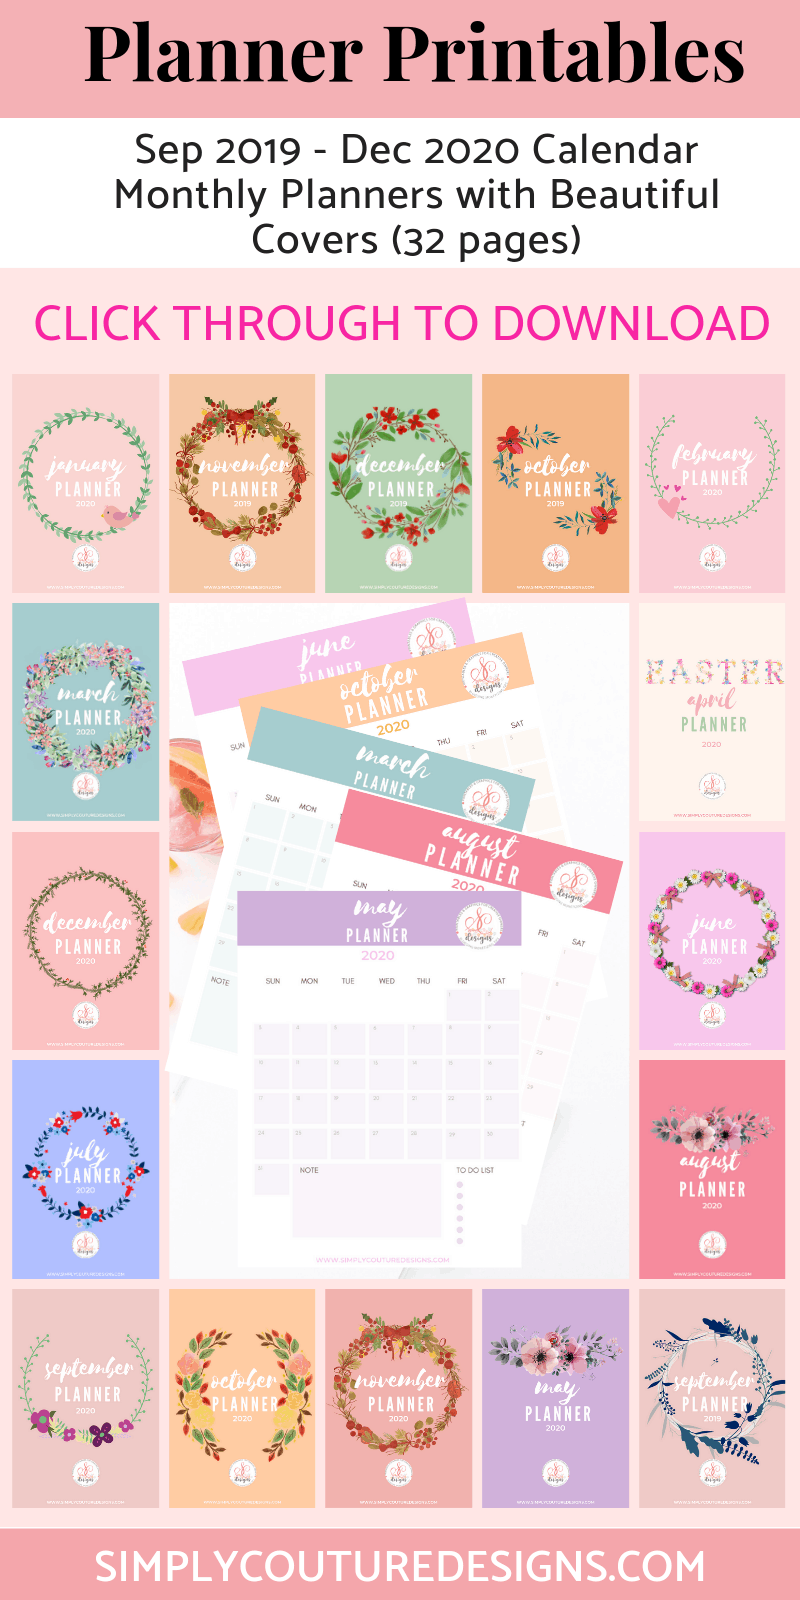 2019/2020 Monthly Calendar planner printables with beautiful floral wreath covers #2020calendarprintable #2010calendarprintable #calendarprintable #wreath #floral #plannercover #calendarplannerprintable